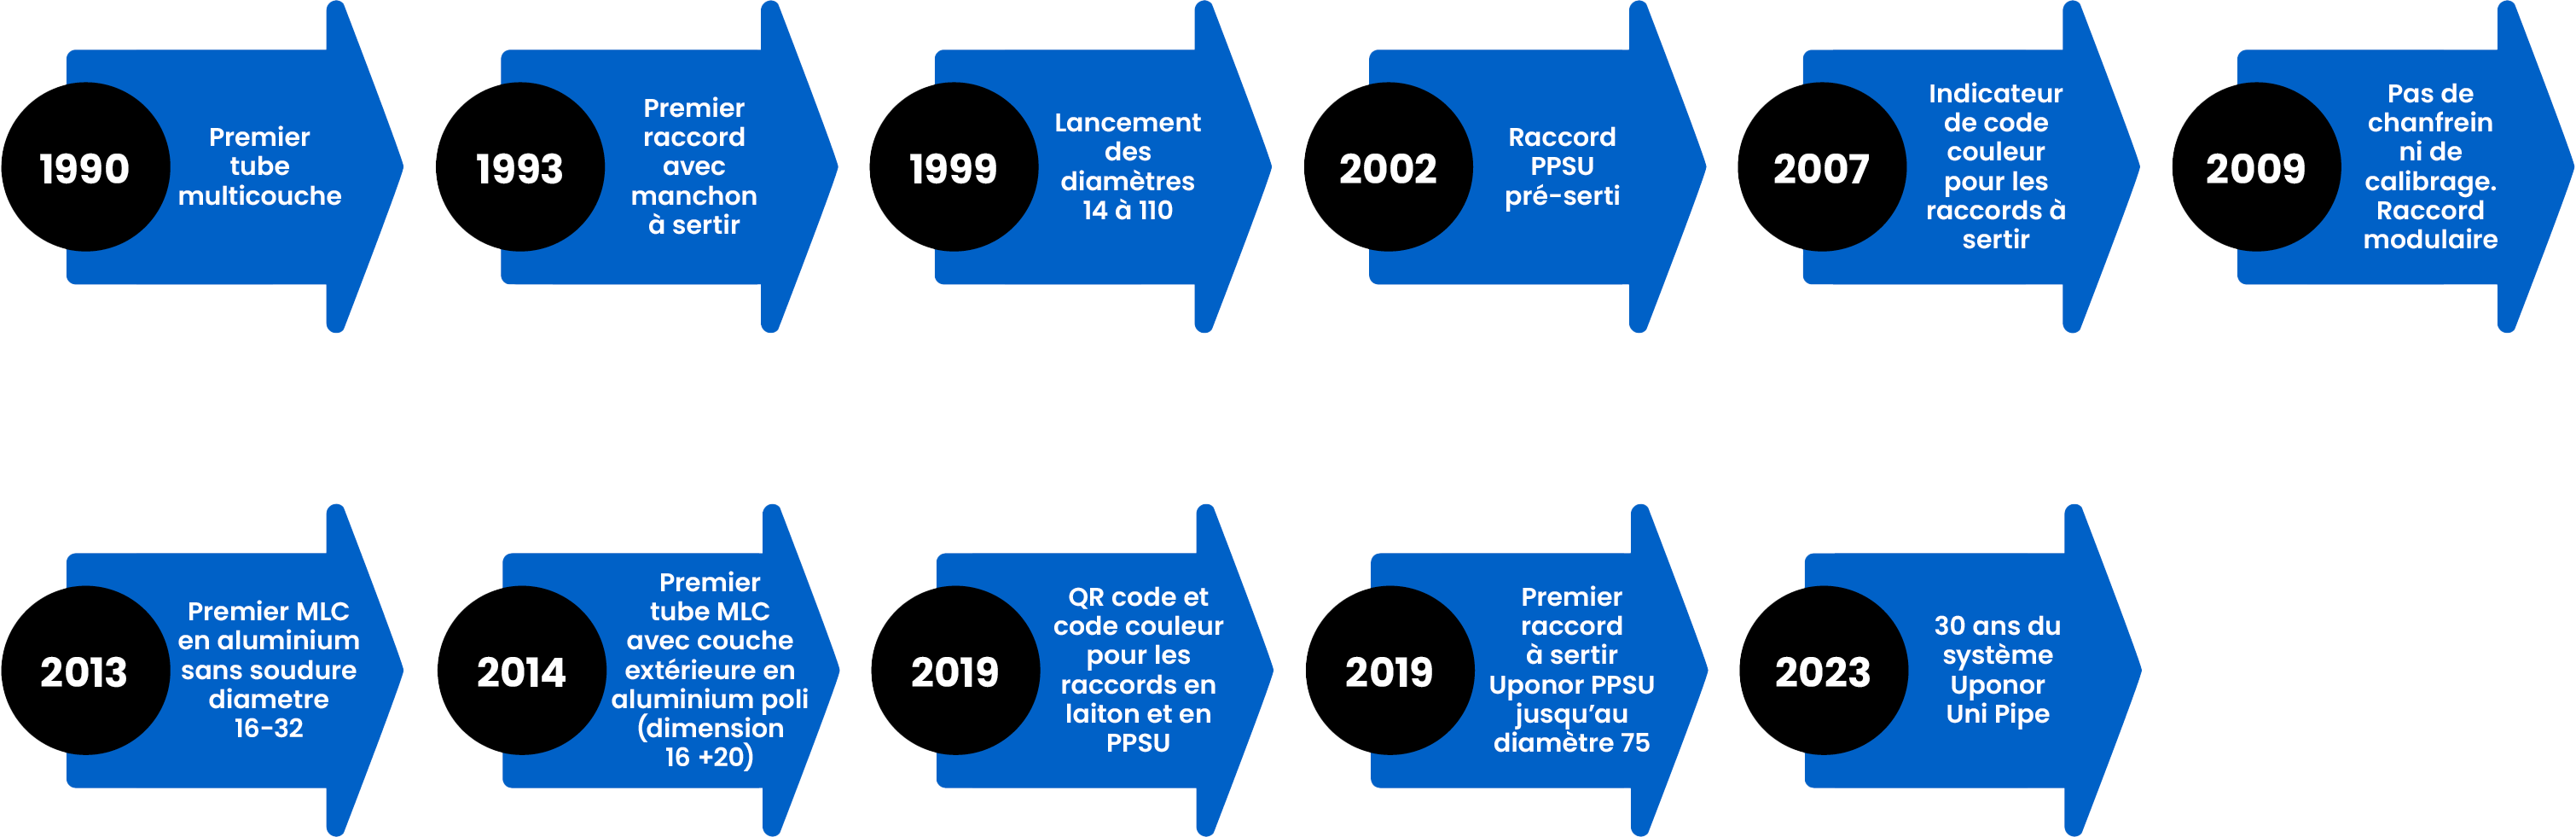 unipipe-systems-timeline